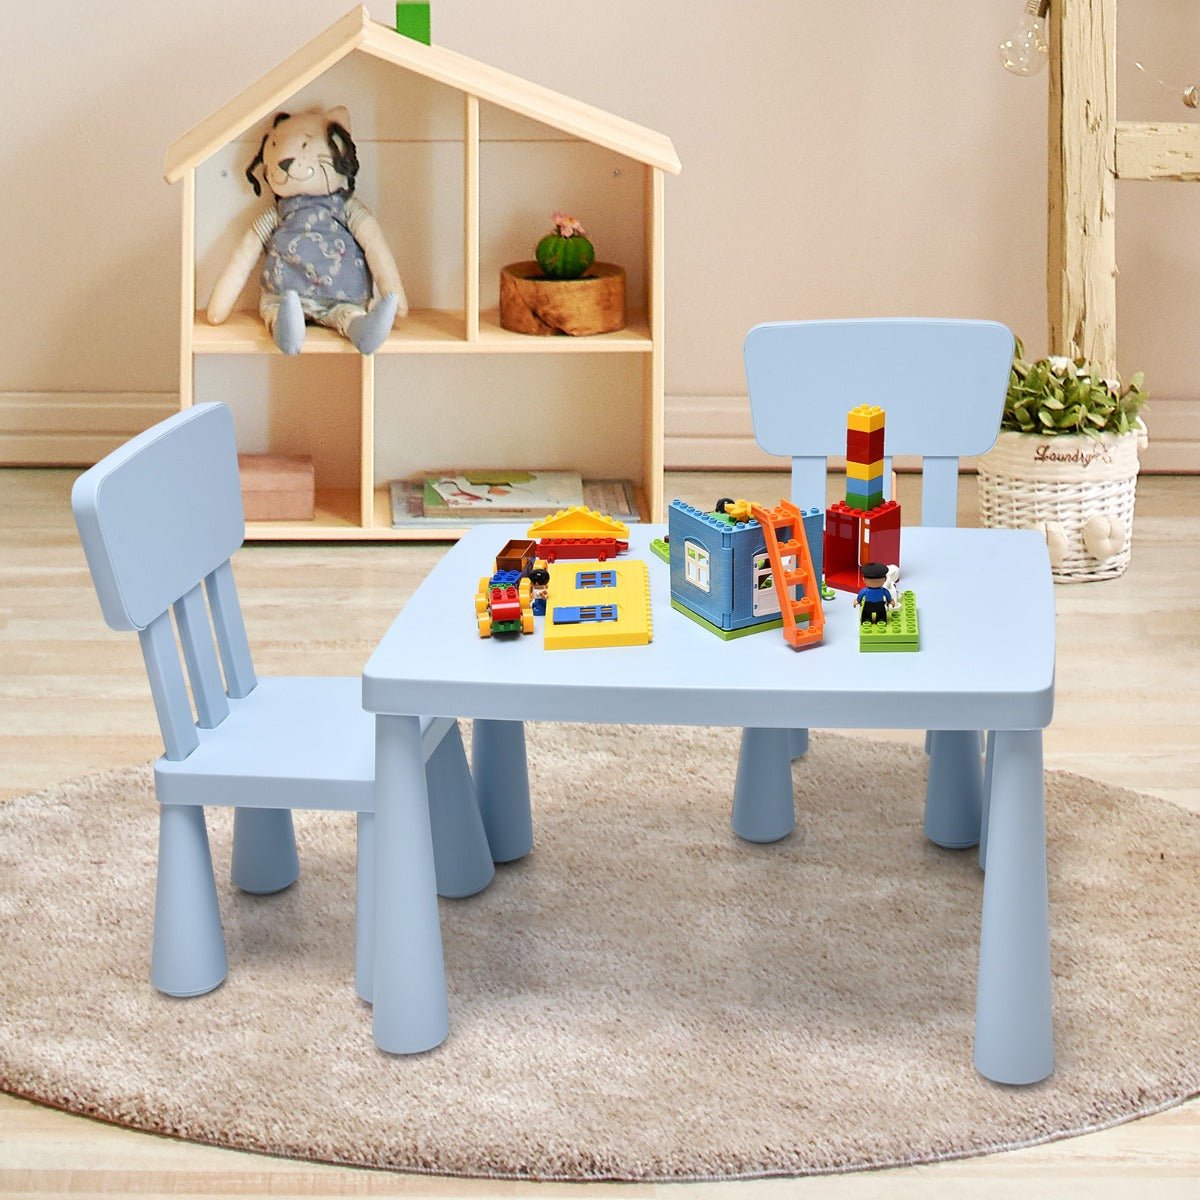 3-Piece Children's Table and Chairs Set - Create a Reading Nook